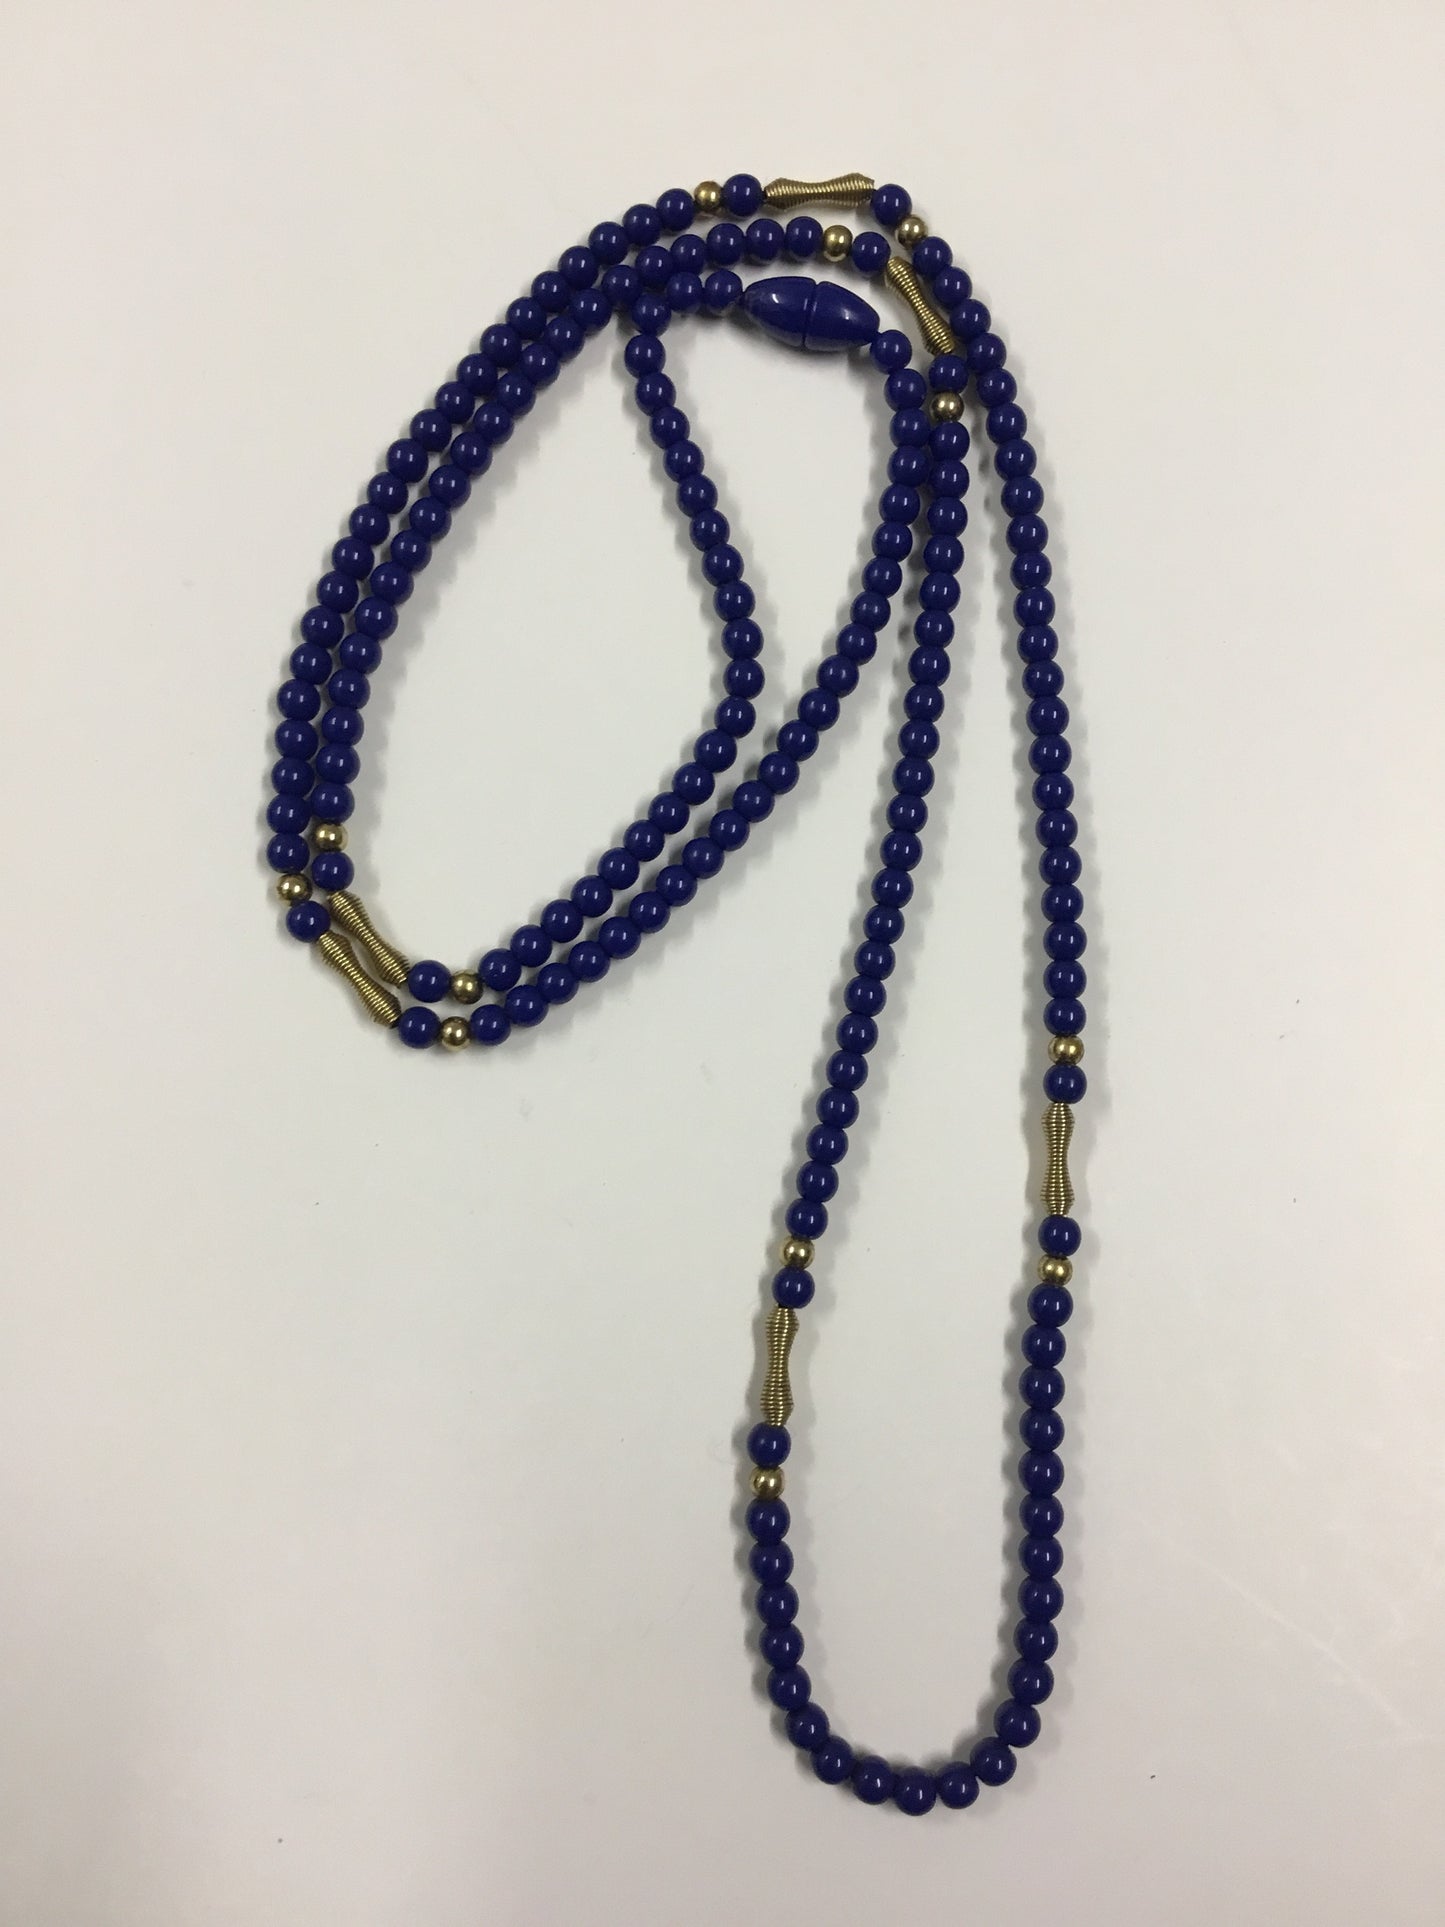 Vintage Cobalt Blue Beaded Necklace With Gold Tone Accents